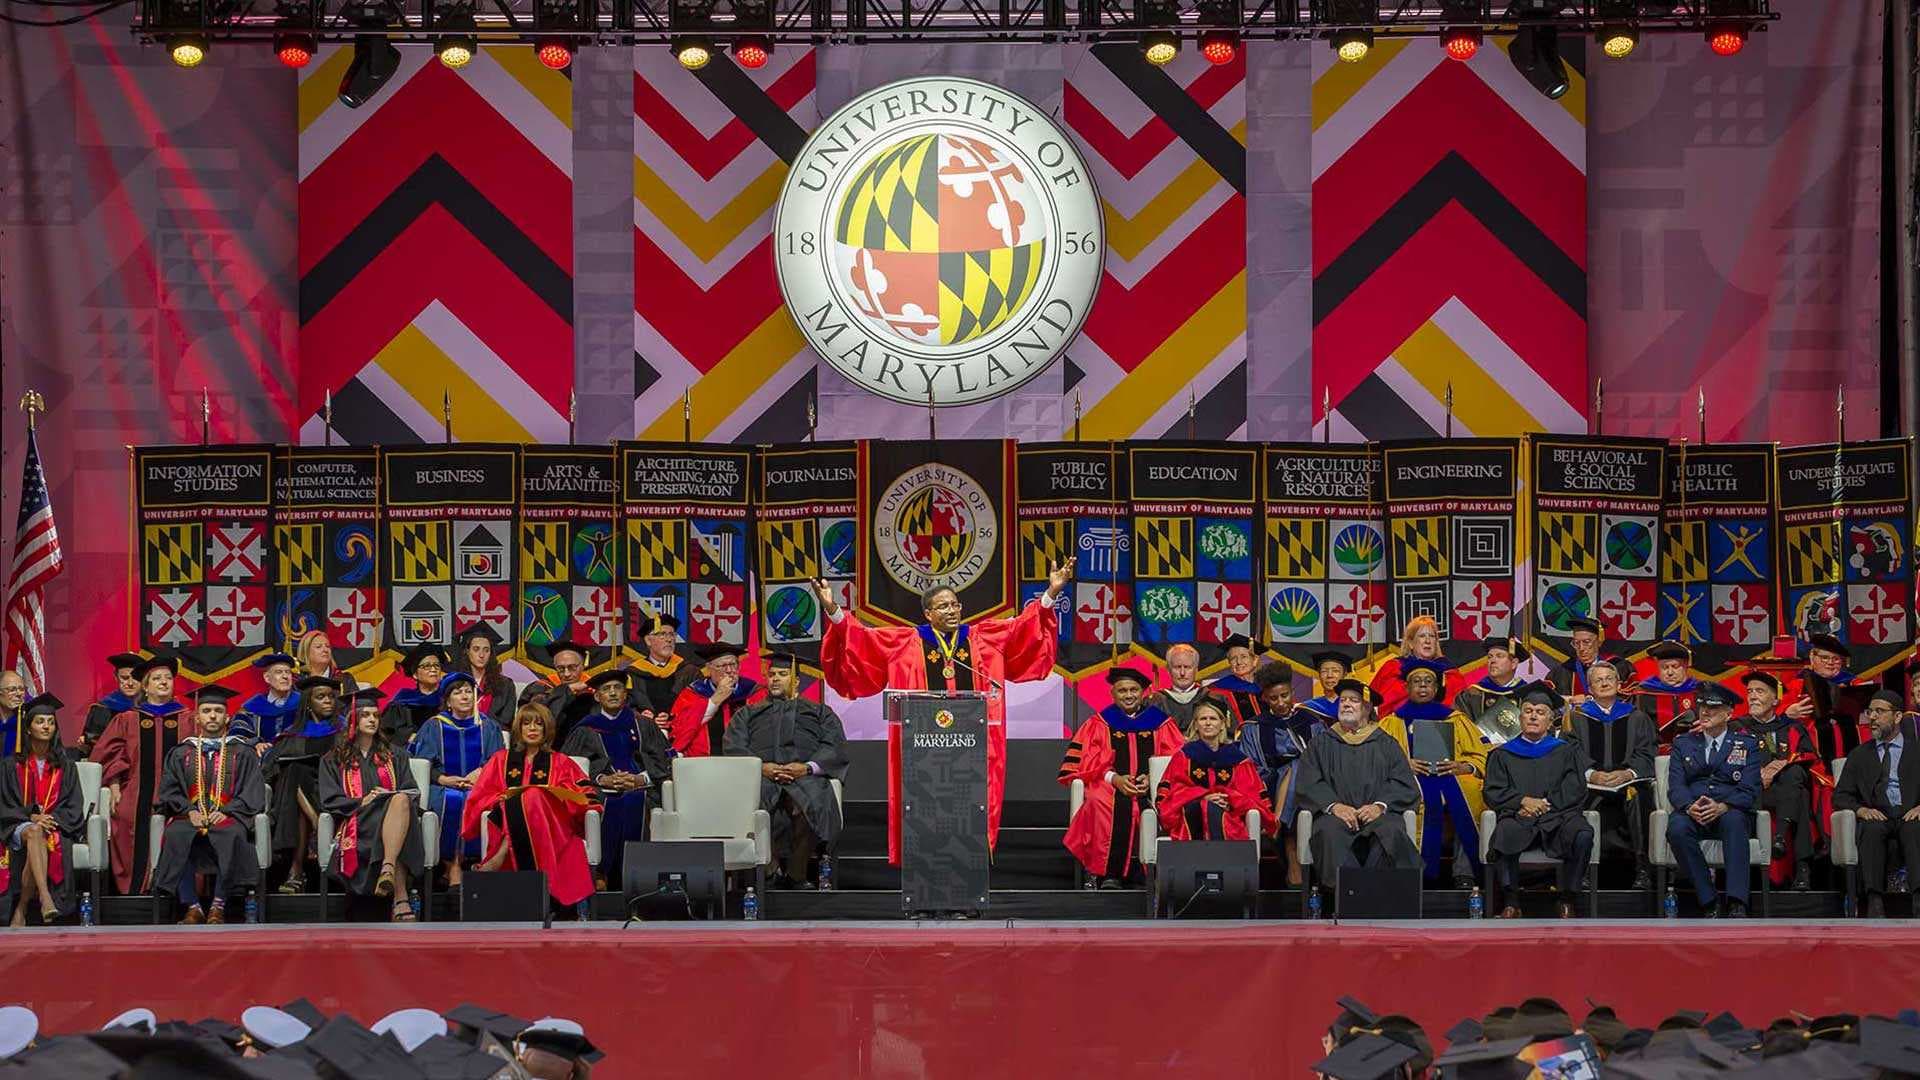 President Pines speaks on stage at Commencement